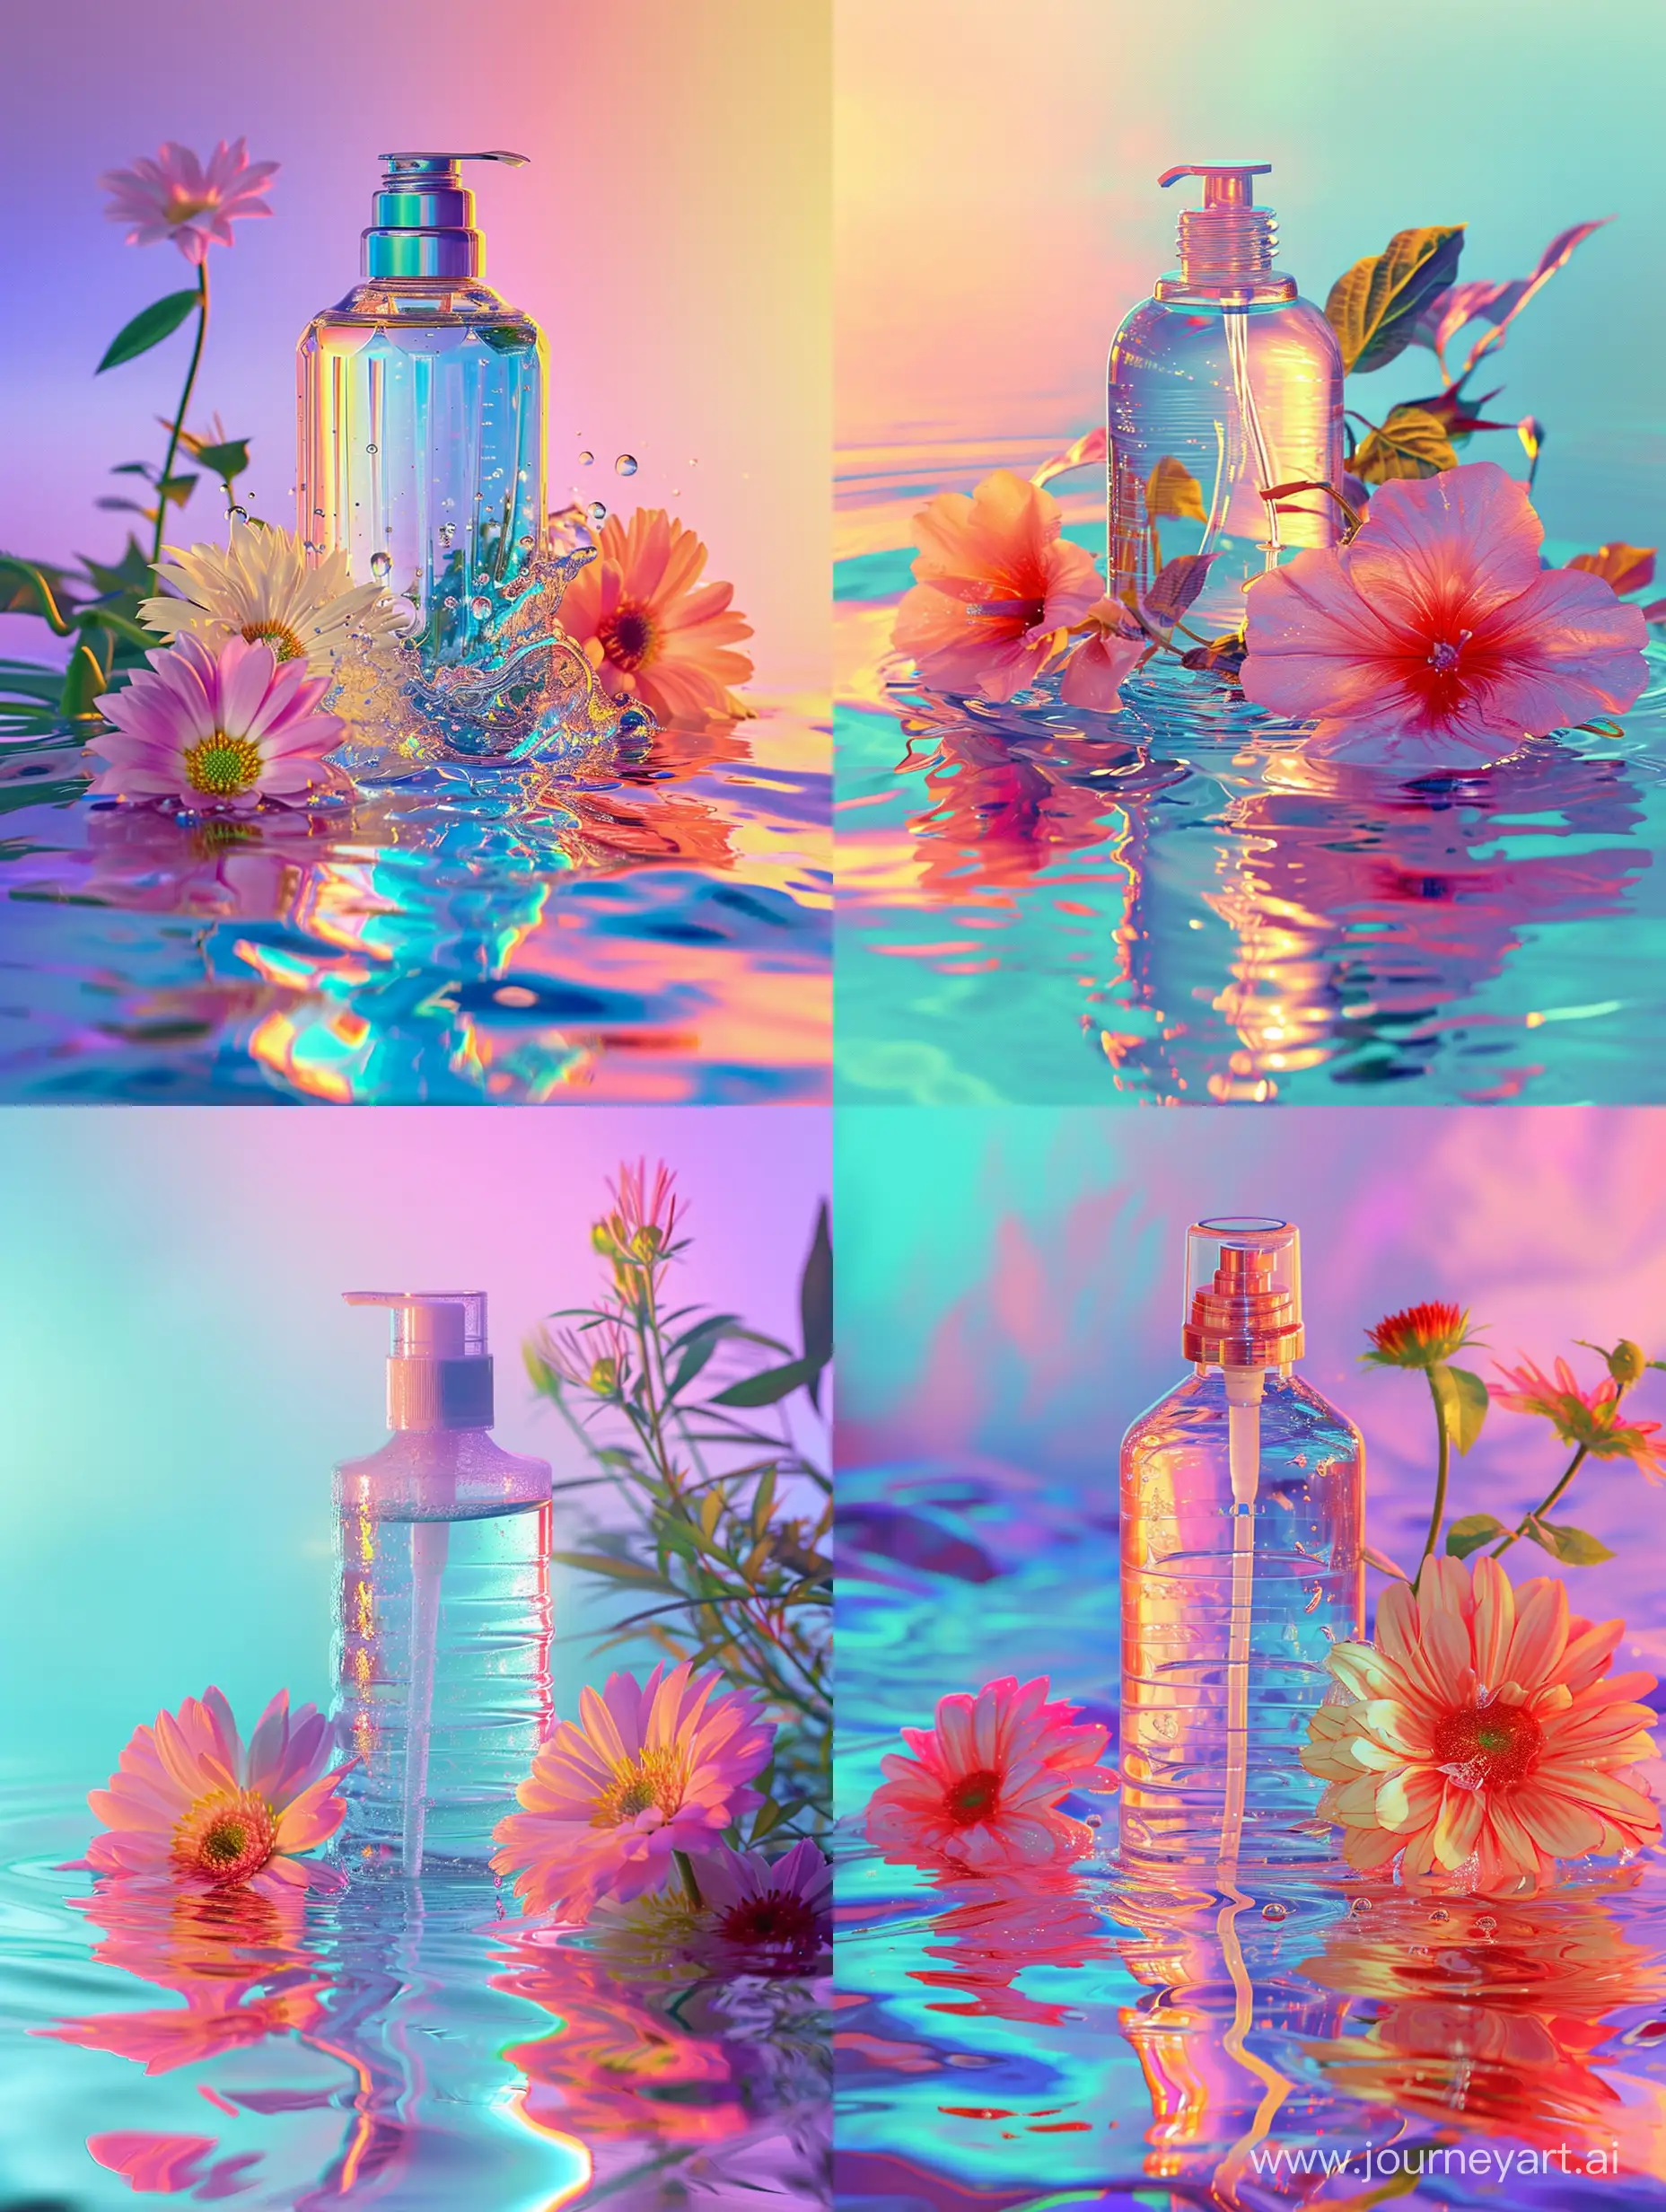 Vibrant-Water-Play-Shampoo-Bottle-Surrounded-by-Flowers-and-Gradient-Background